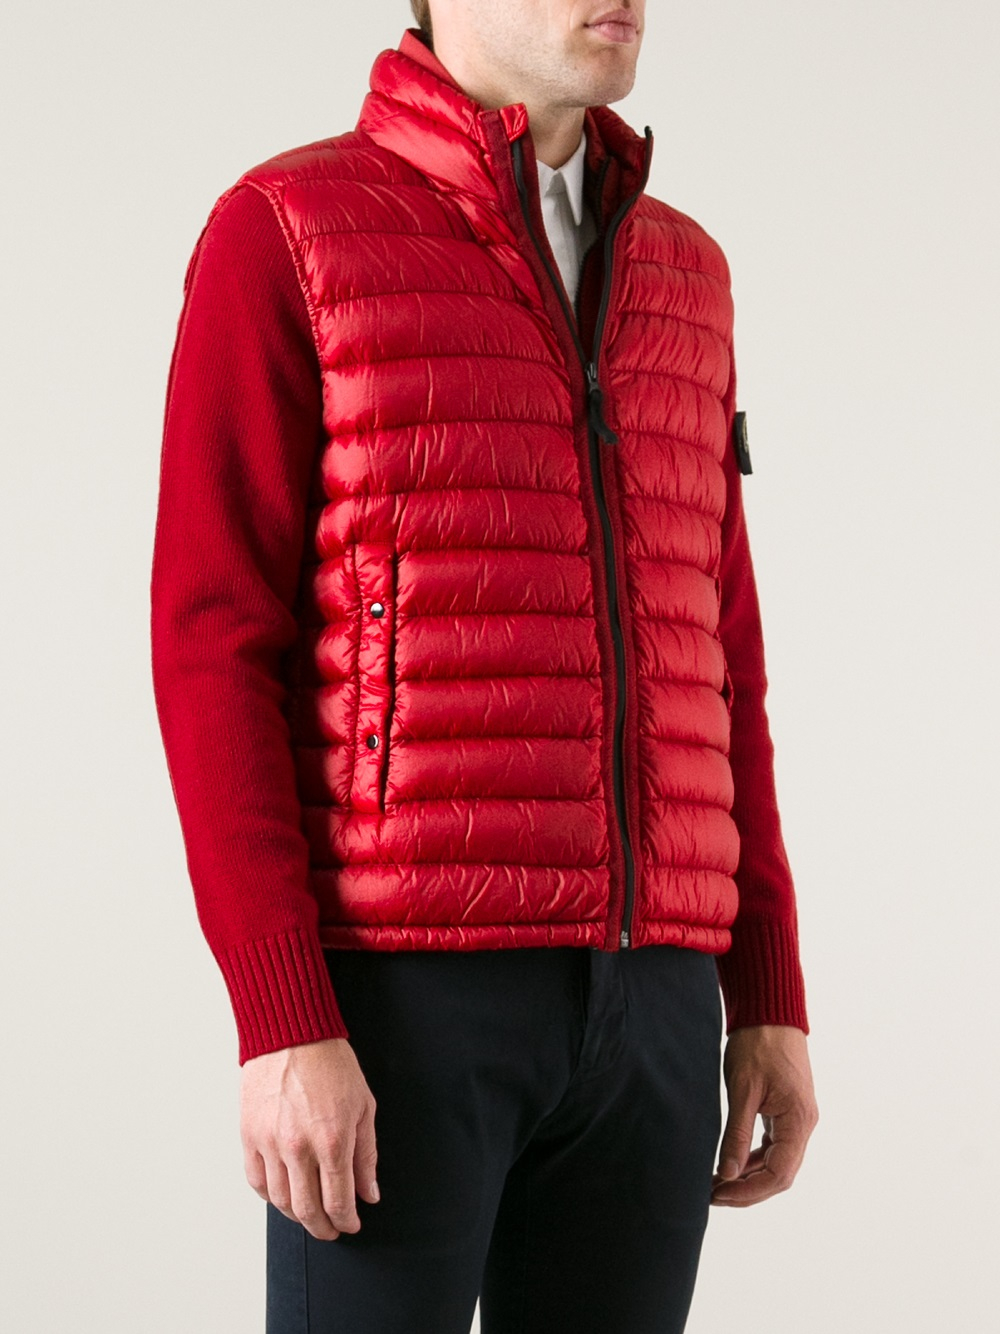 Stone Island Stone Island Padded Gilet in Red for Men - Lyst